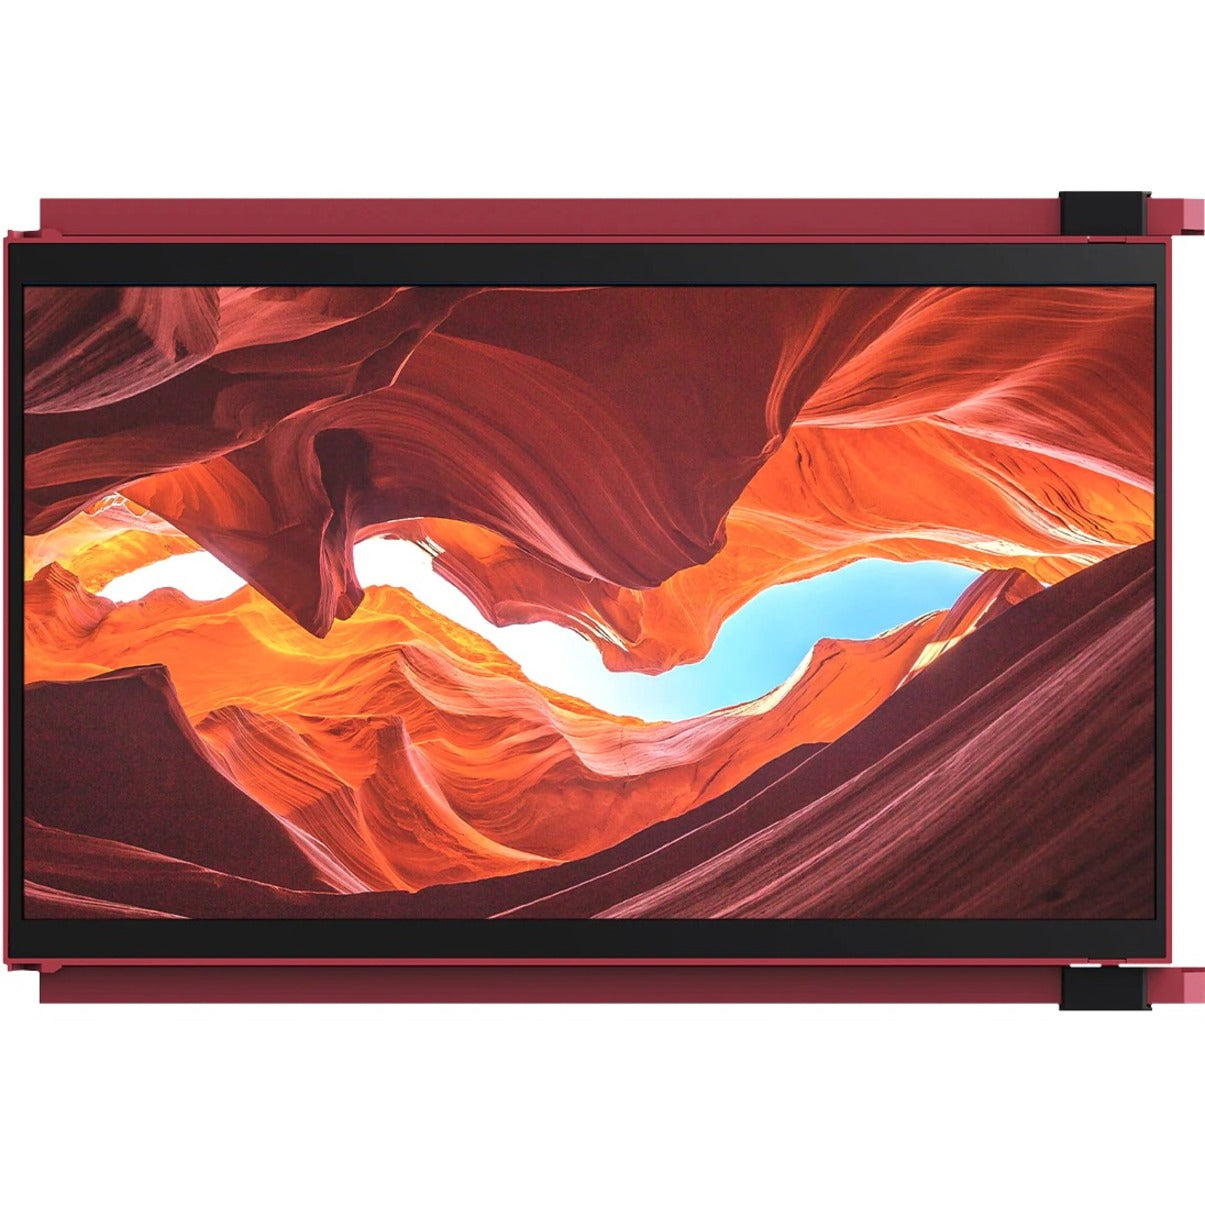 Mobile Pixels 101-1007P03 Duex Max Portable Dual Screen Laptop Monitor, Rio Rouge 14.1 Full HD 1080P